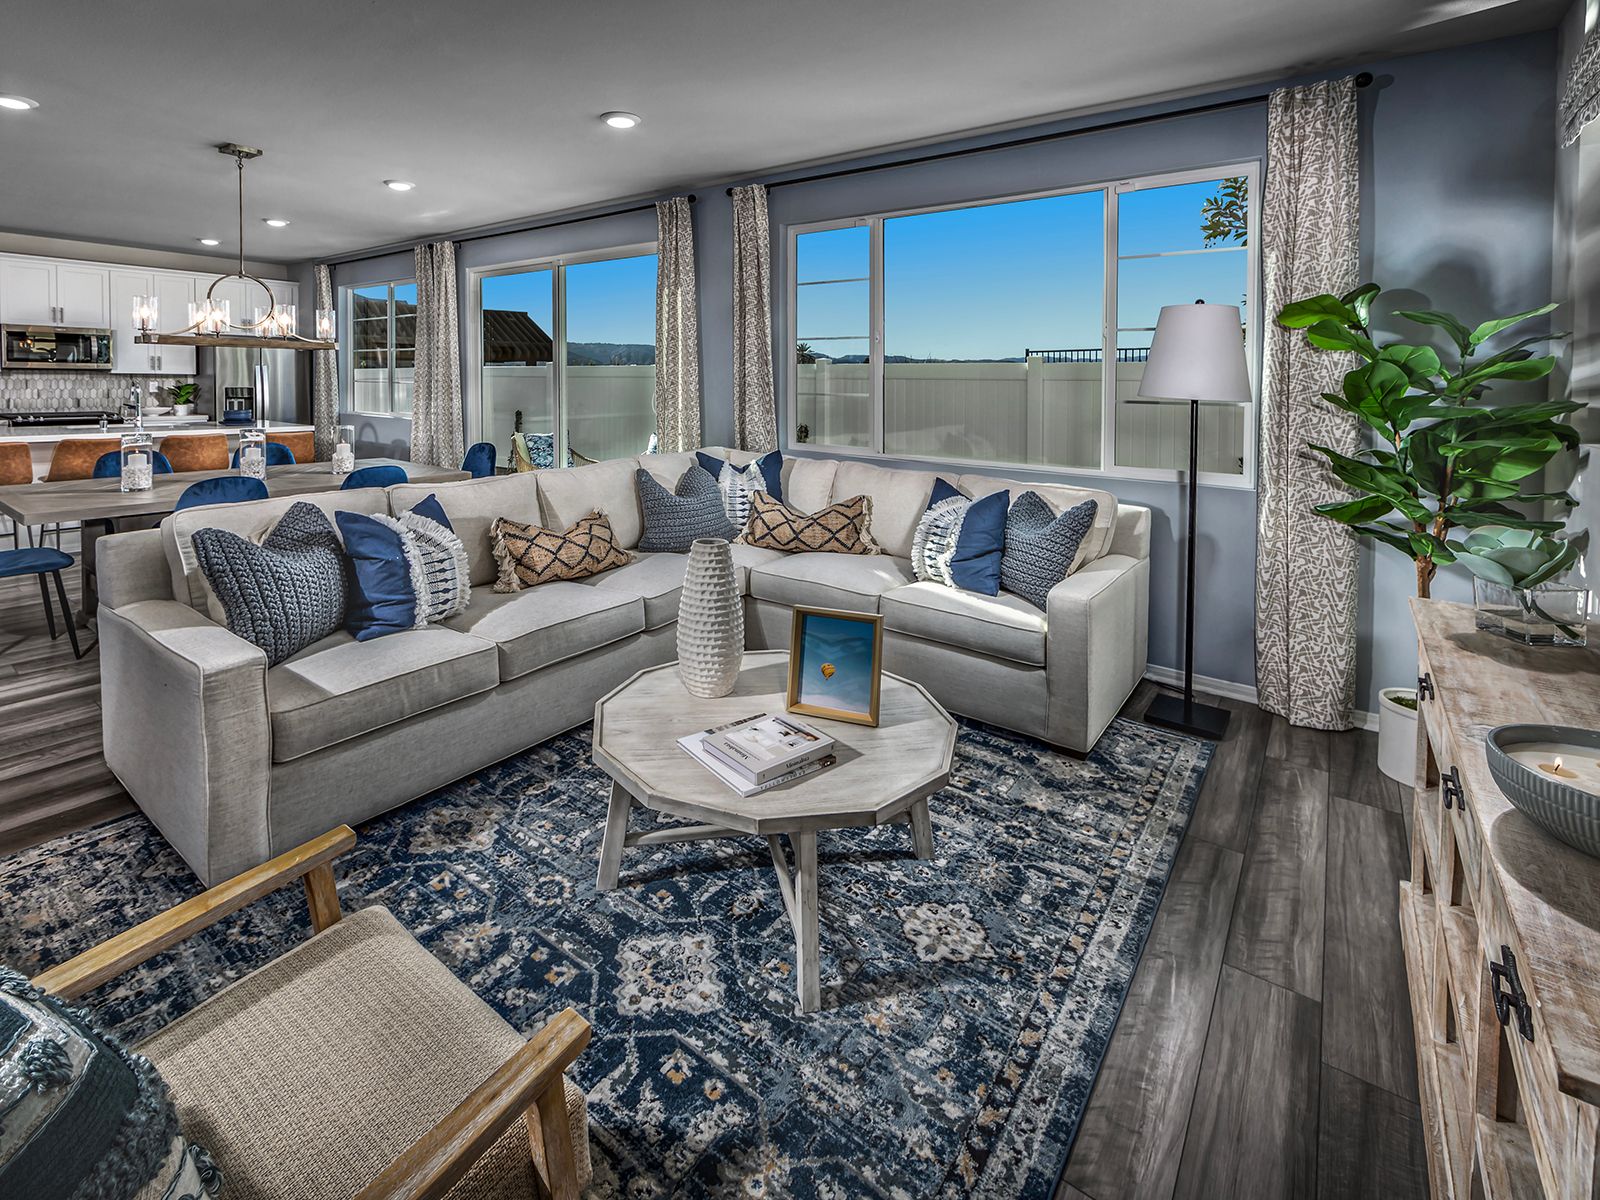 Allow the family to stay connected with our open-concept floorplans.